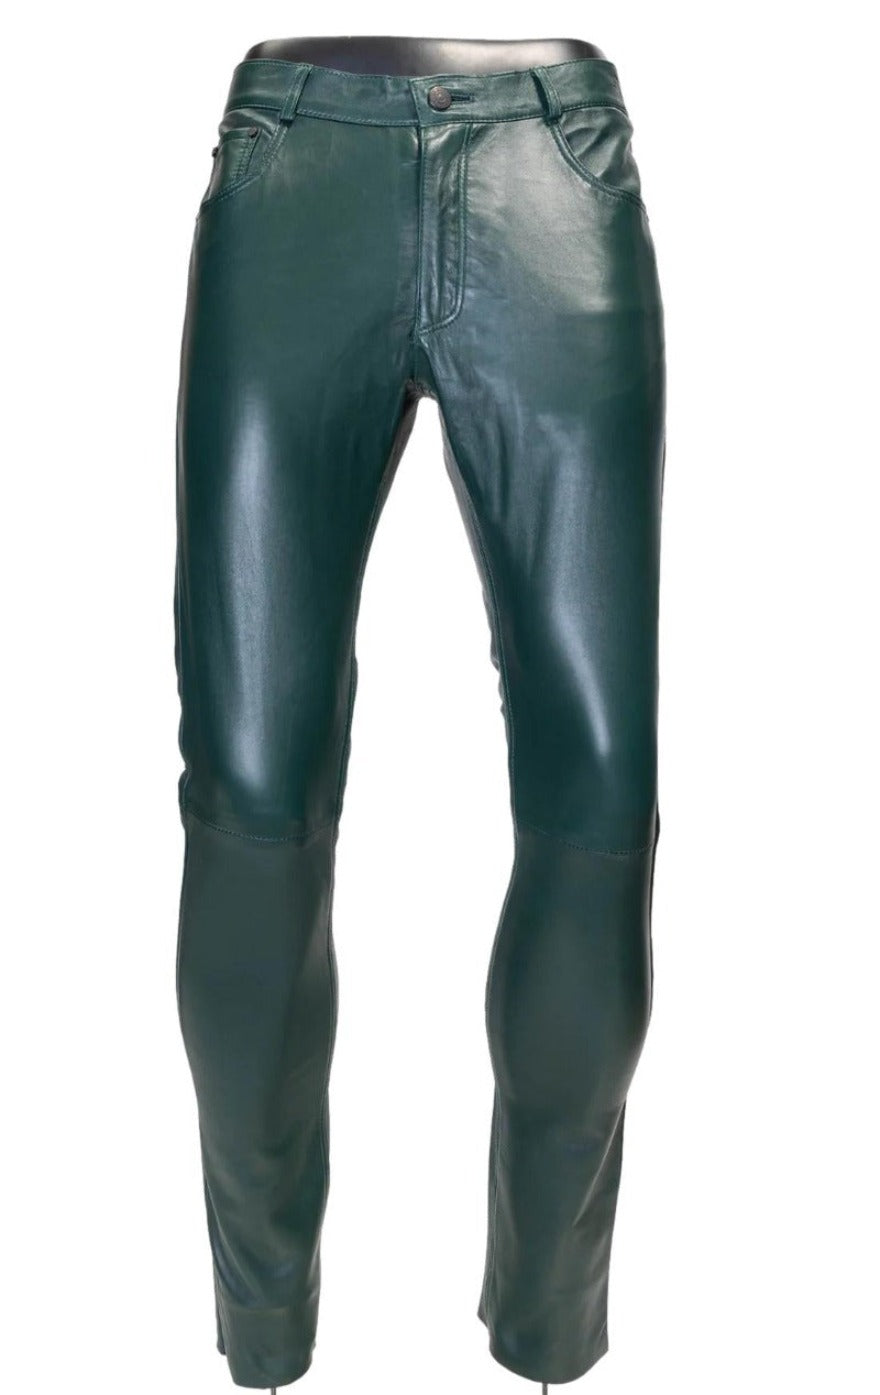 Image of our mens green leather pants on a mannequin, front view.